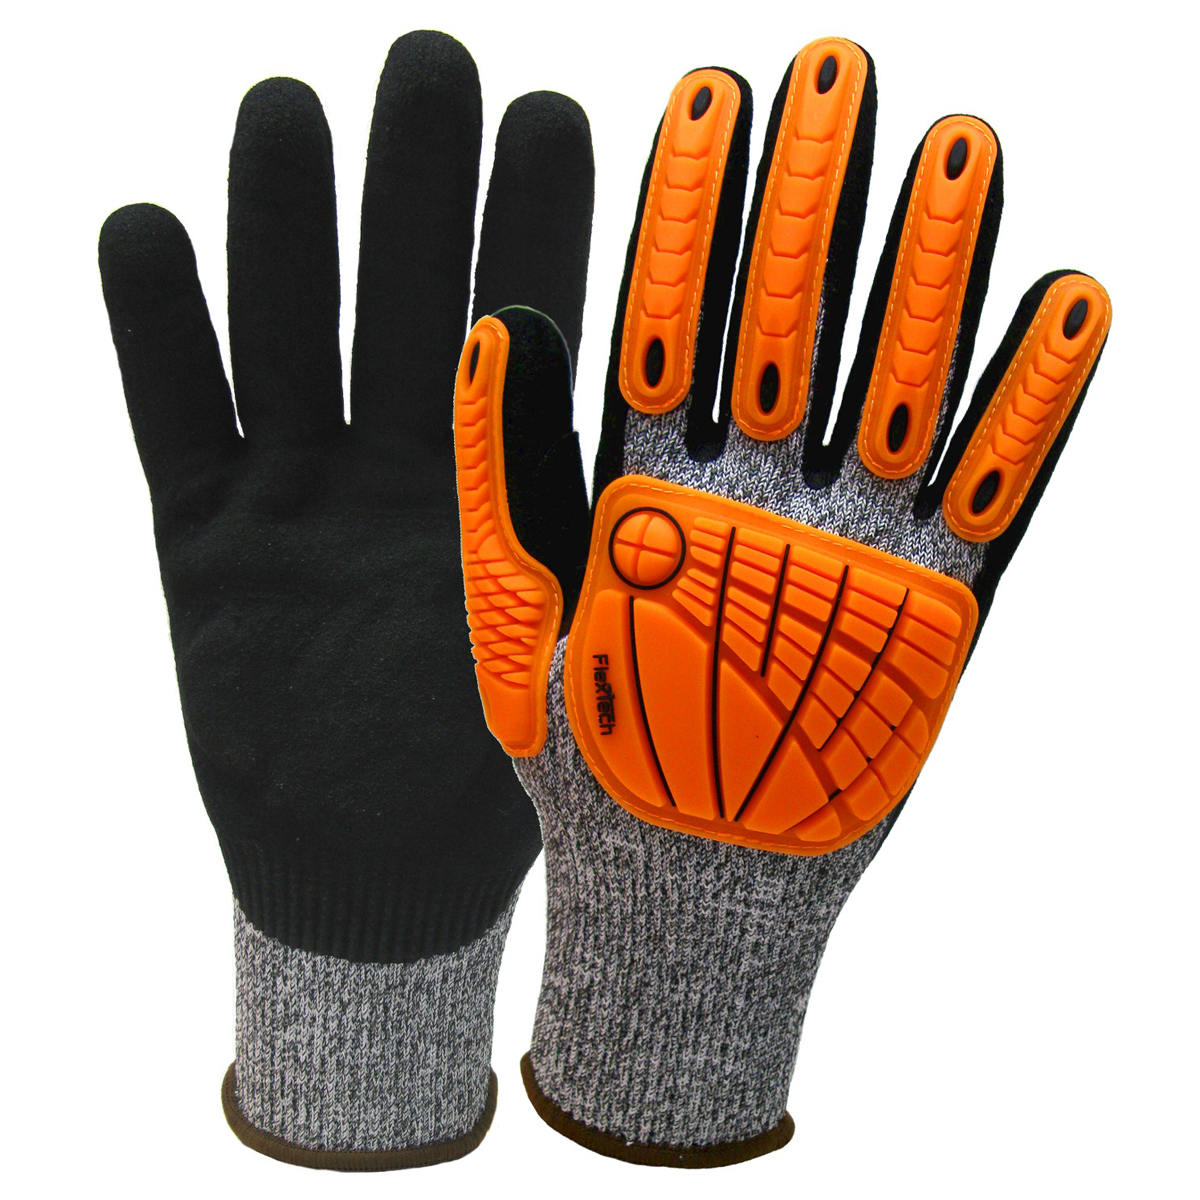 Wells Lamont X-Large FlexTech™ 13 Gauge Fiber And Stainless Steel Cut Resistant Gloves With Sandy Nitrile Coated Palm And Finger